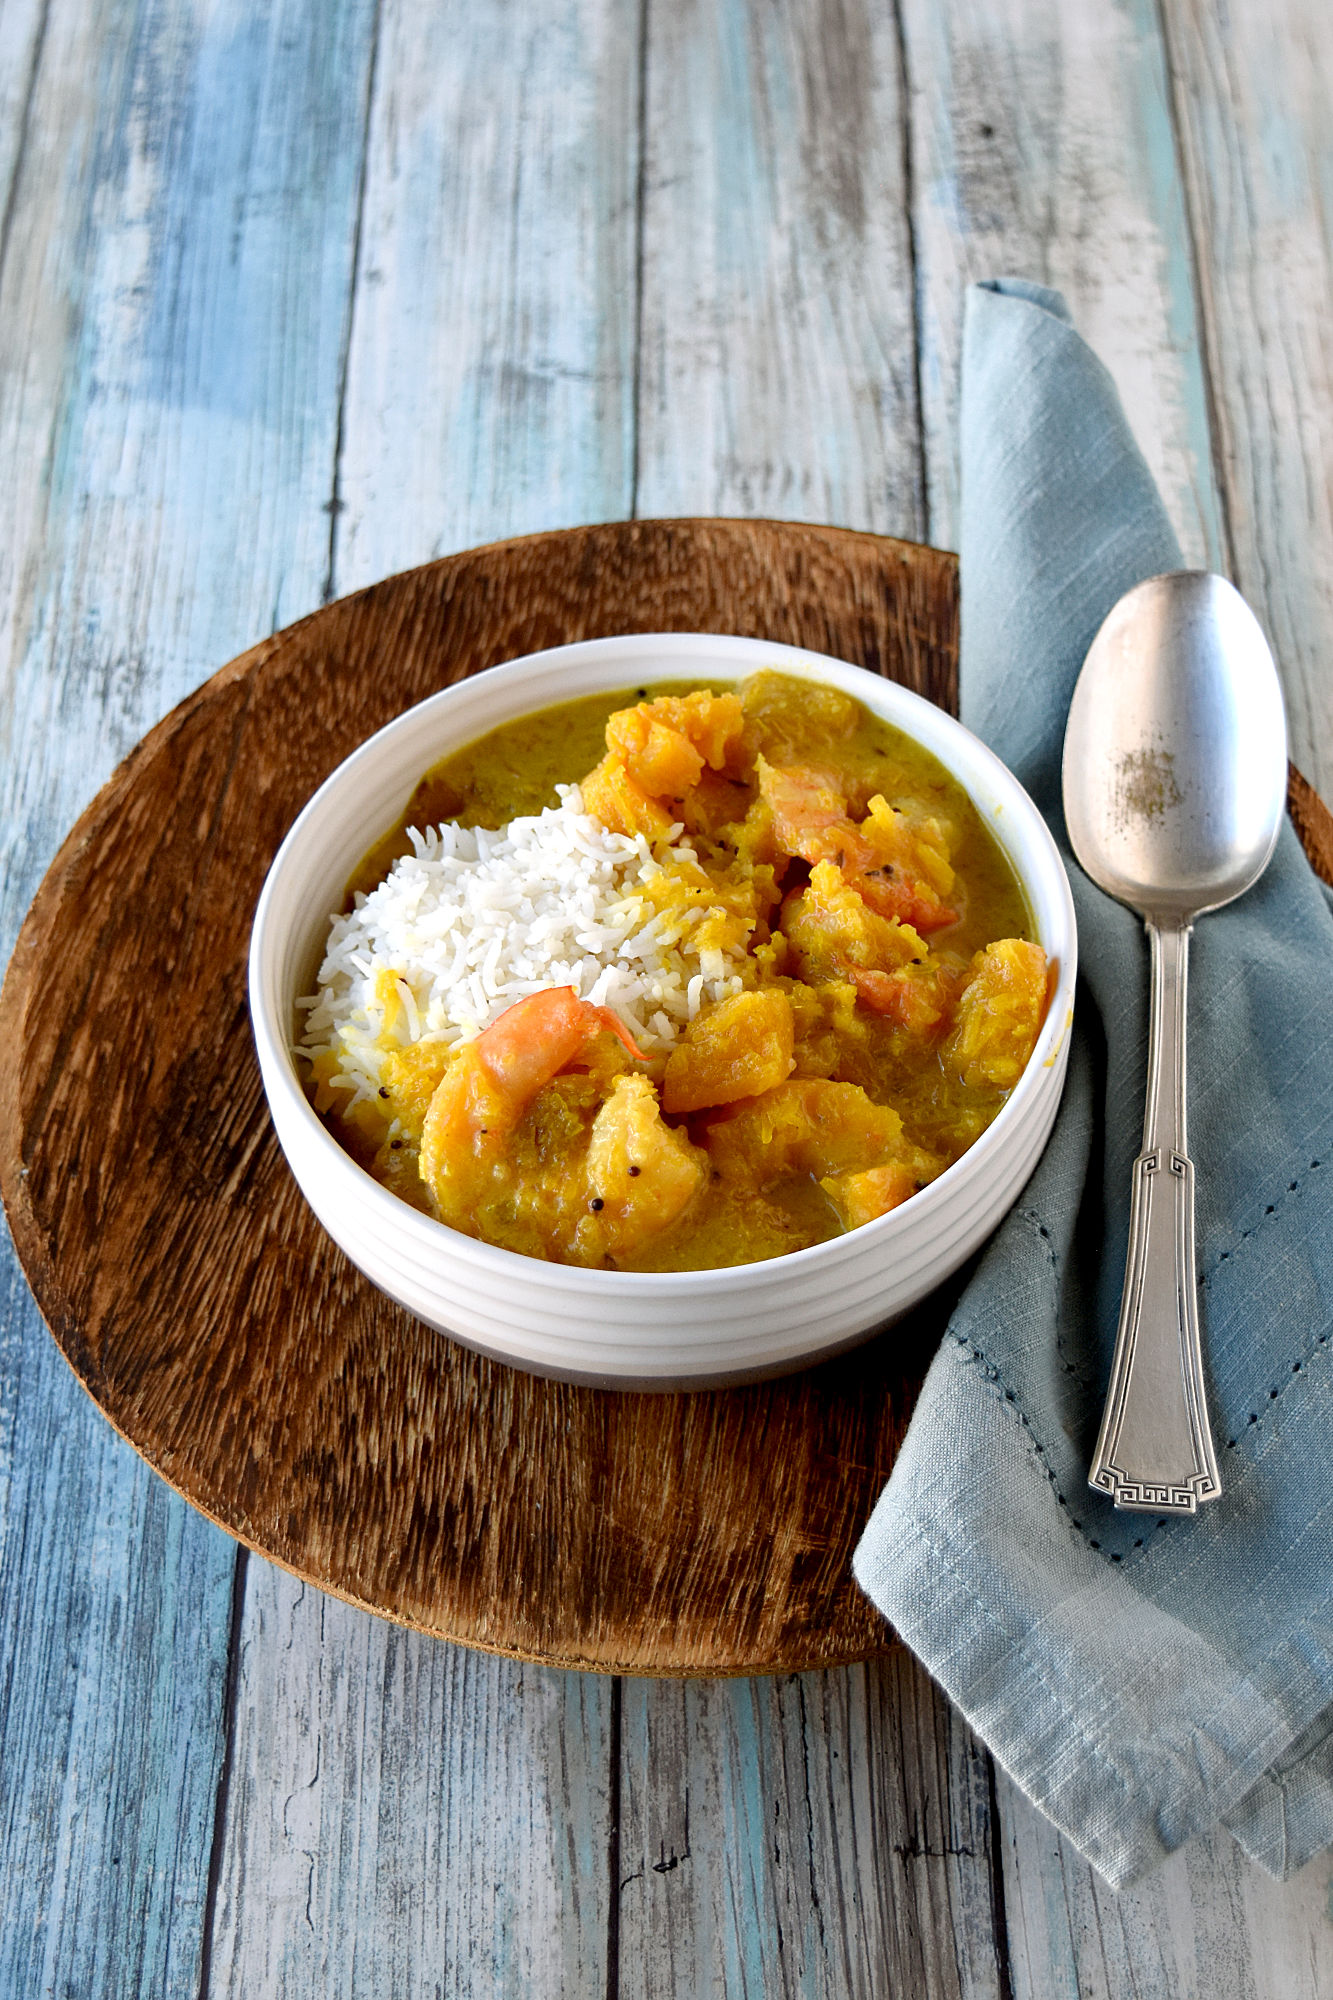 Coconut Pumpkin Shrimp Curry is packed with delicious curry flavors, sweet pumpkin, tasty shrimp, and a kick from the homemade chili base.  It is creamy with yummy kick. #PumpkinWeek